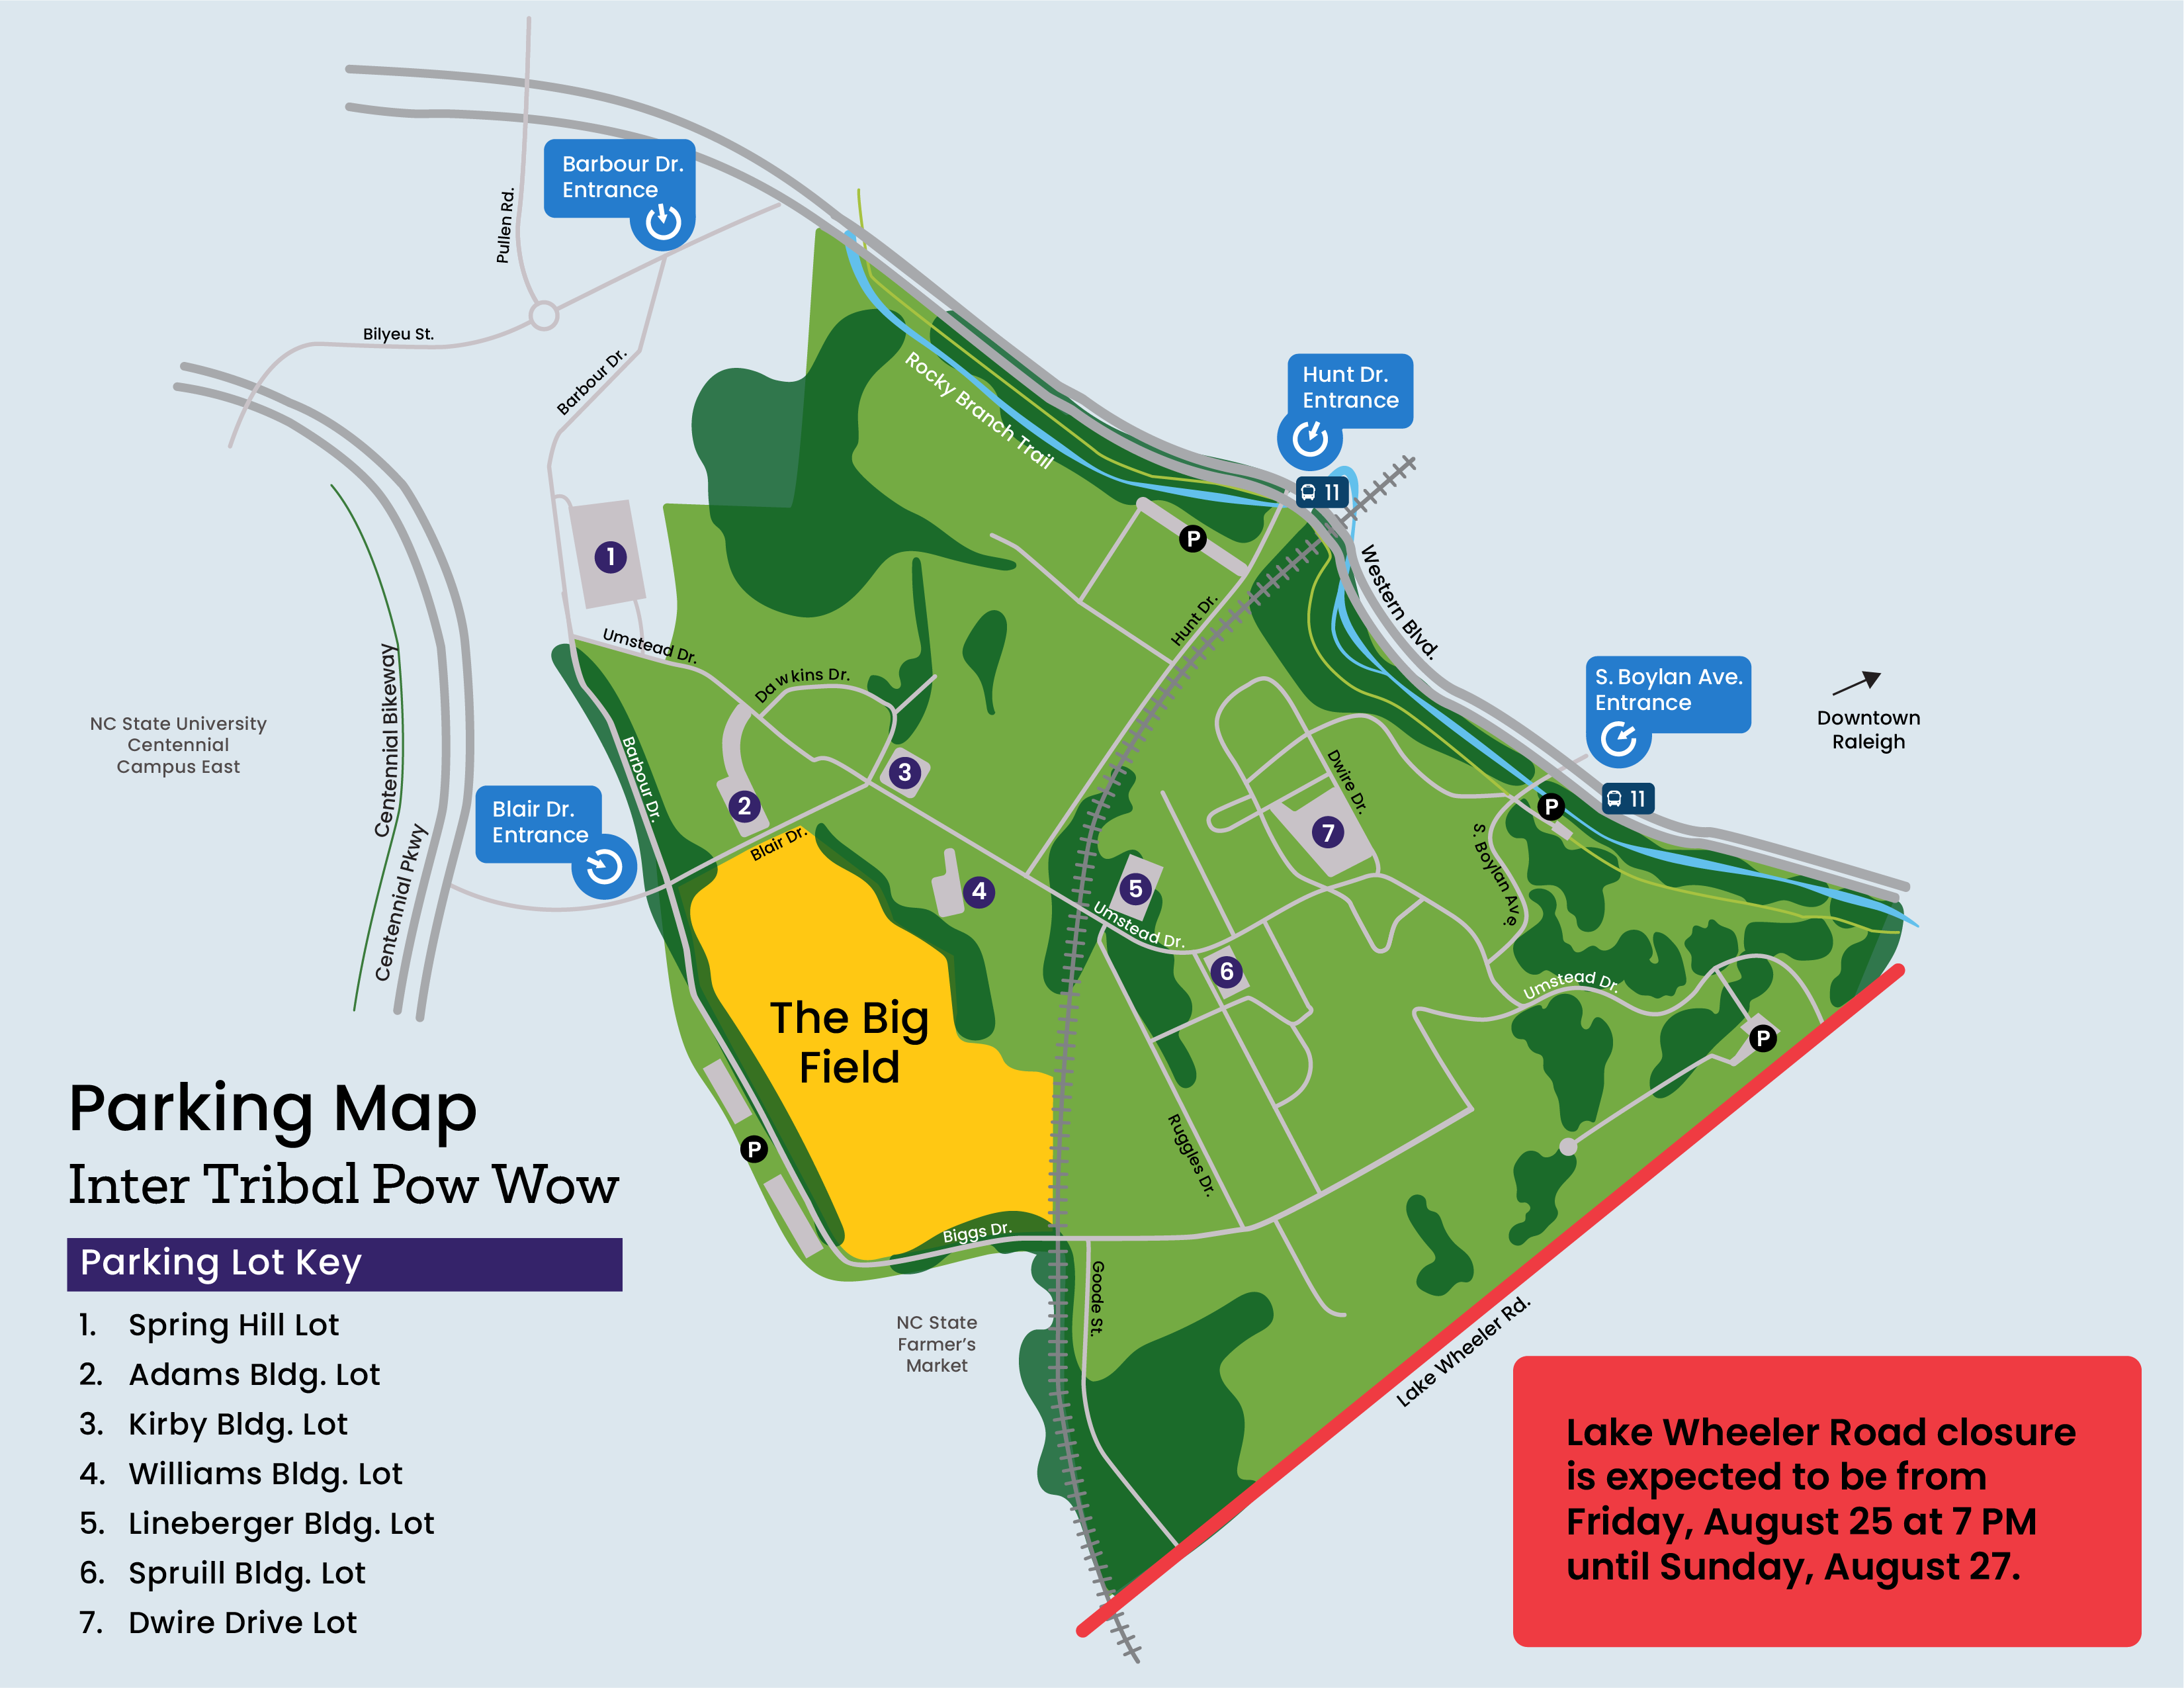 Parking Map for events on the Big Field 